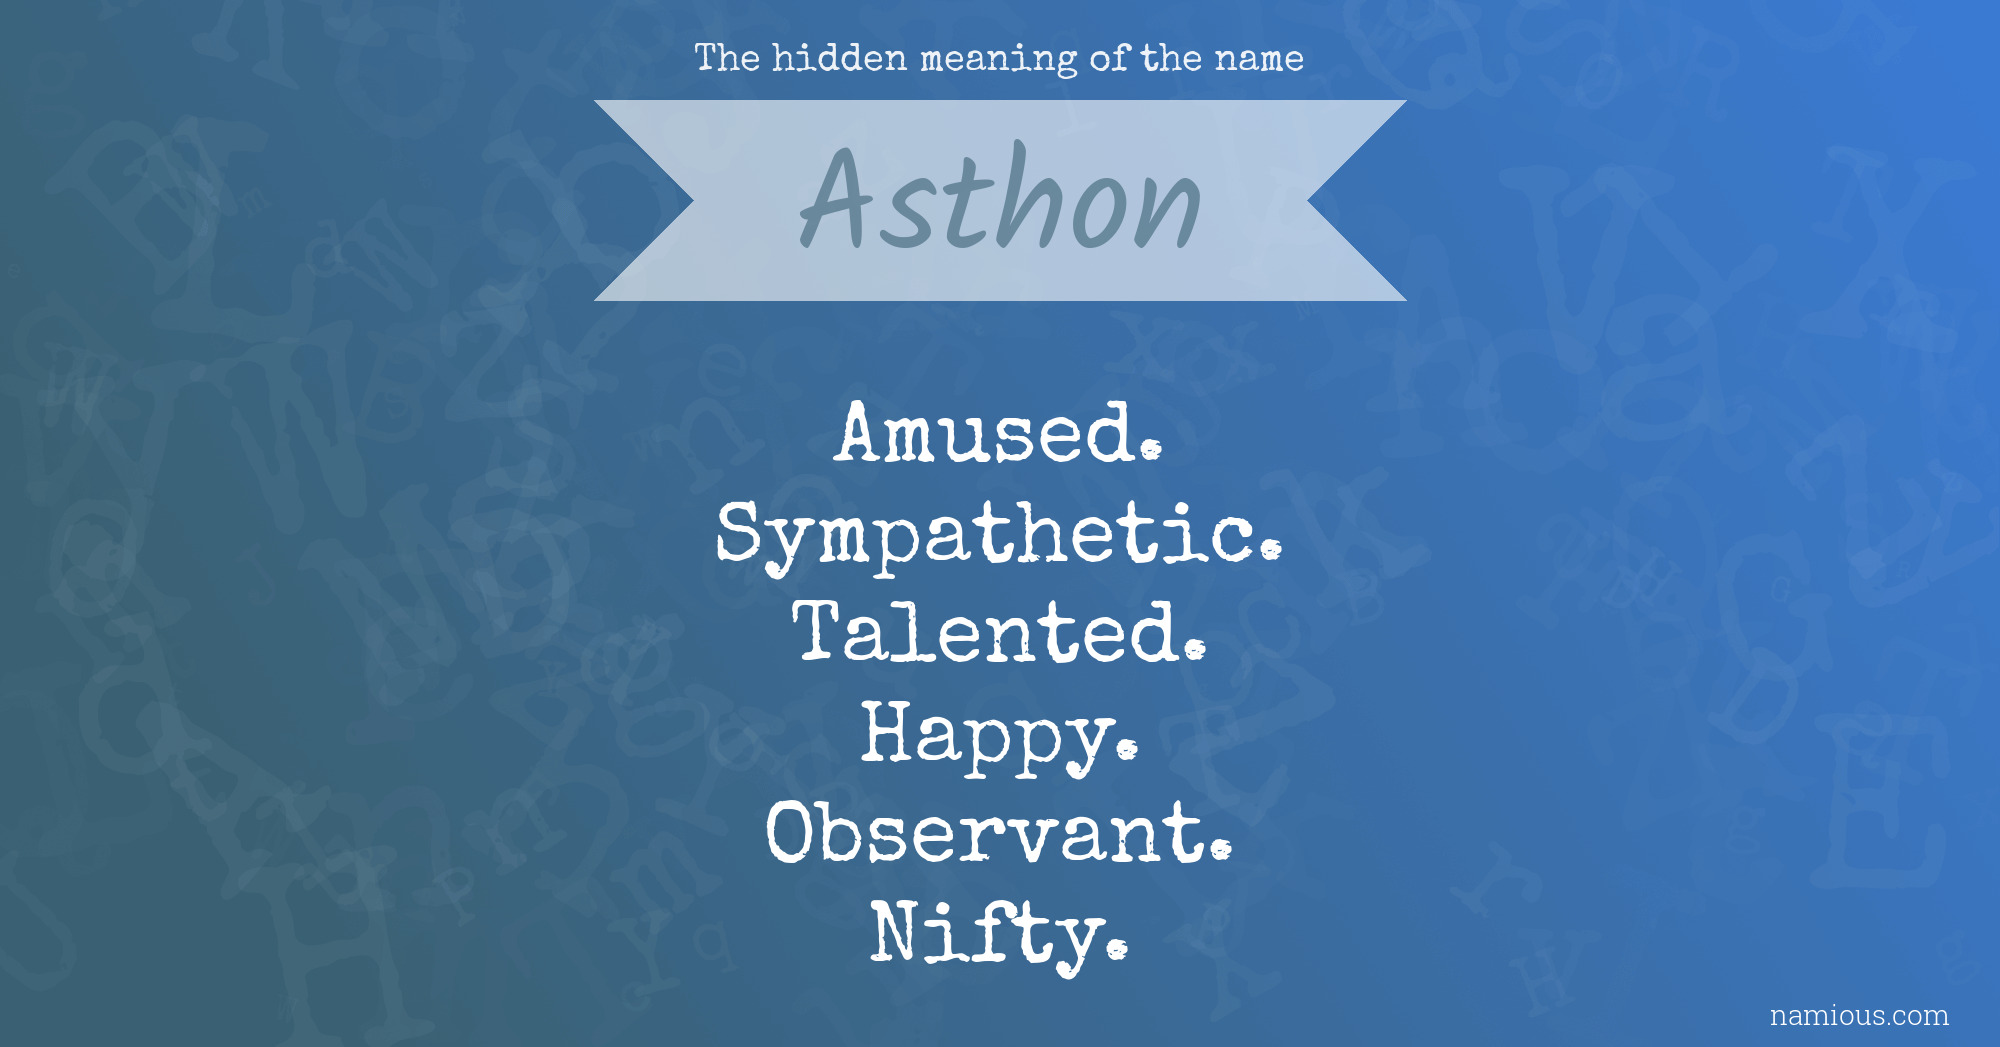 The hidden meaning of the name Asthon